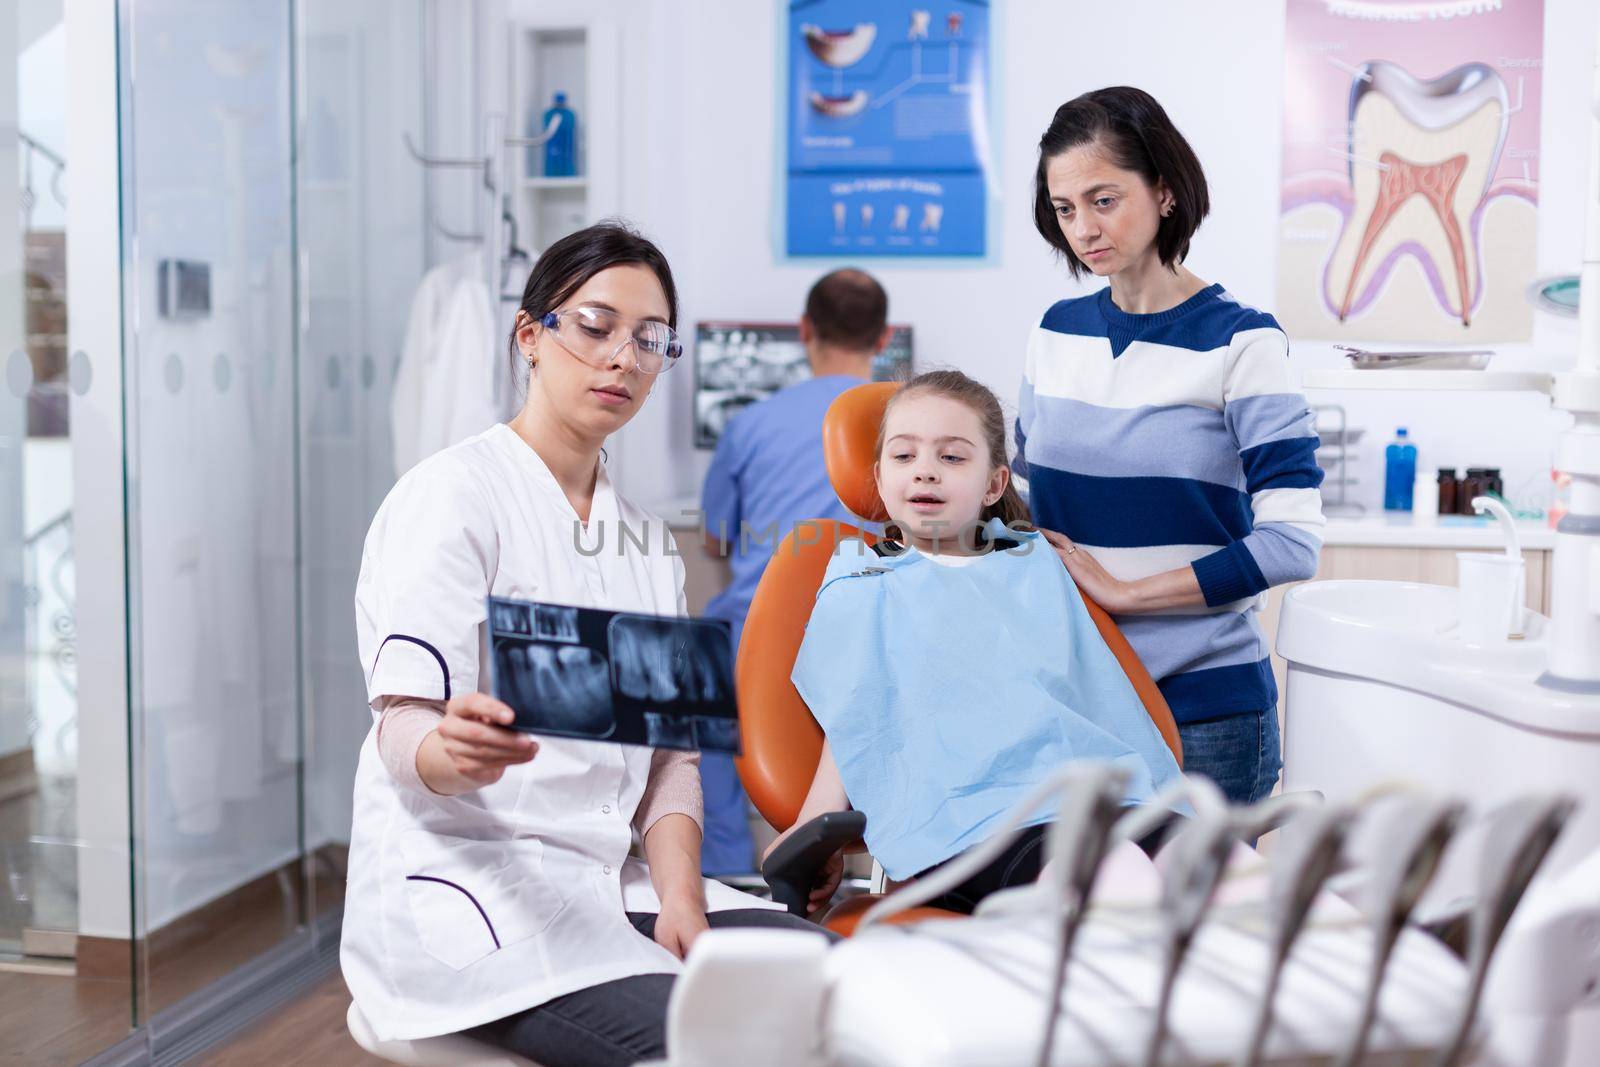 Dentist examining little kid radiography sitting on chair wearing dental bib. Stomatologist explaining teeth diagnosis to mother of child in health clinic holding x-ray.